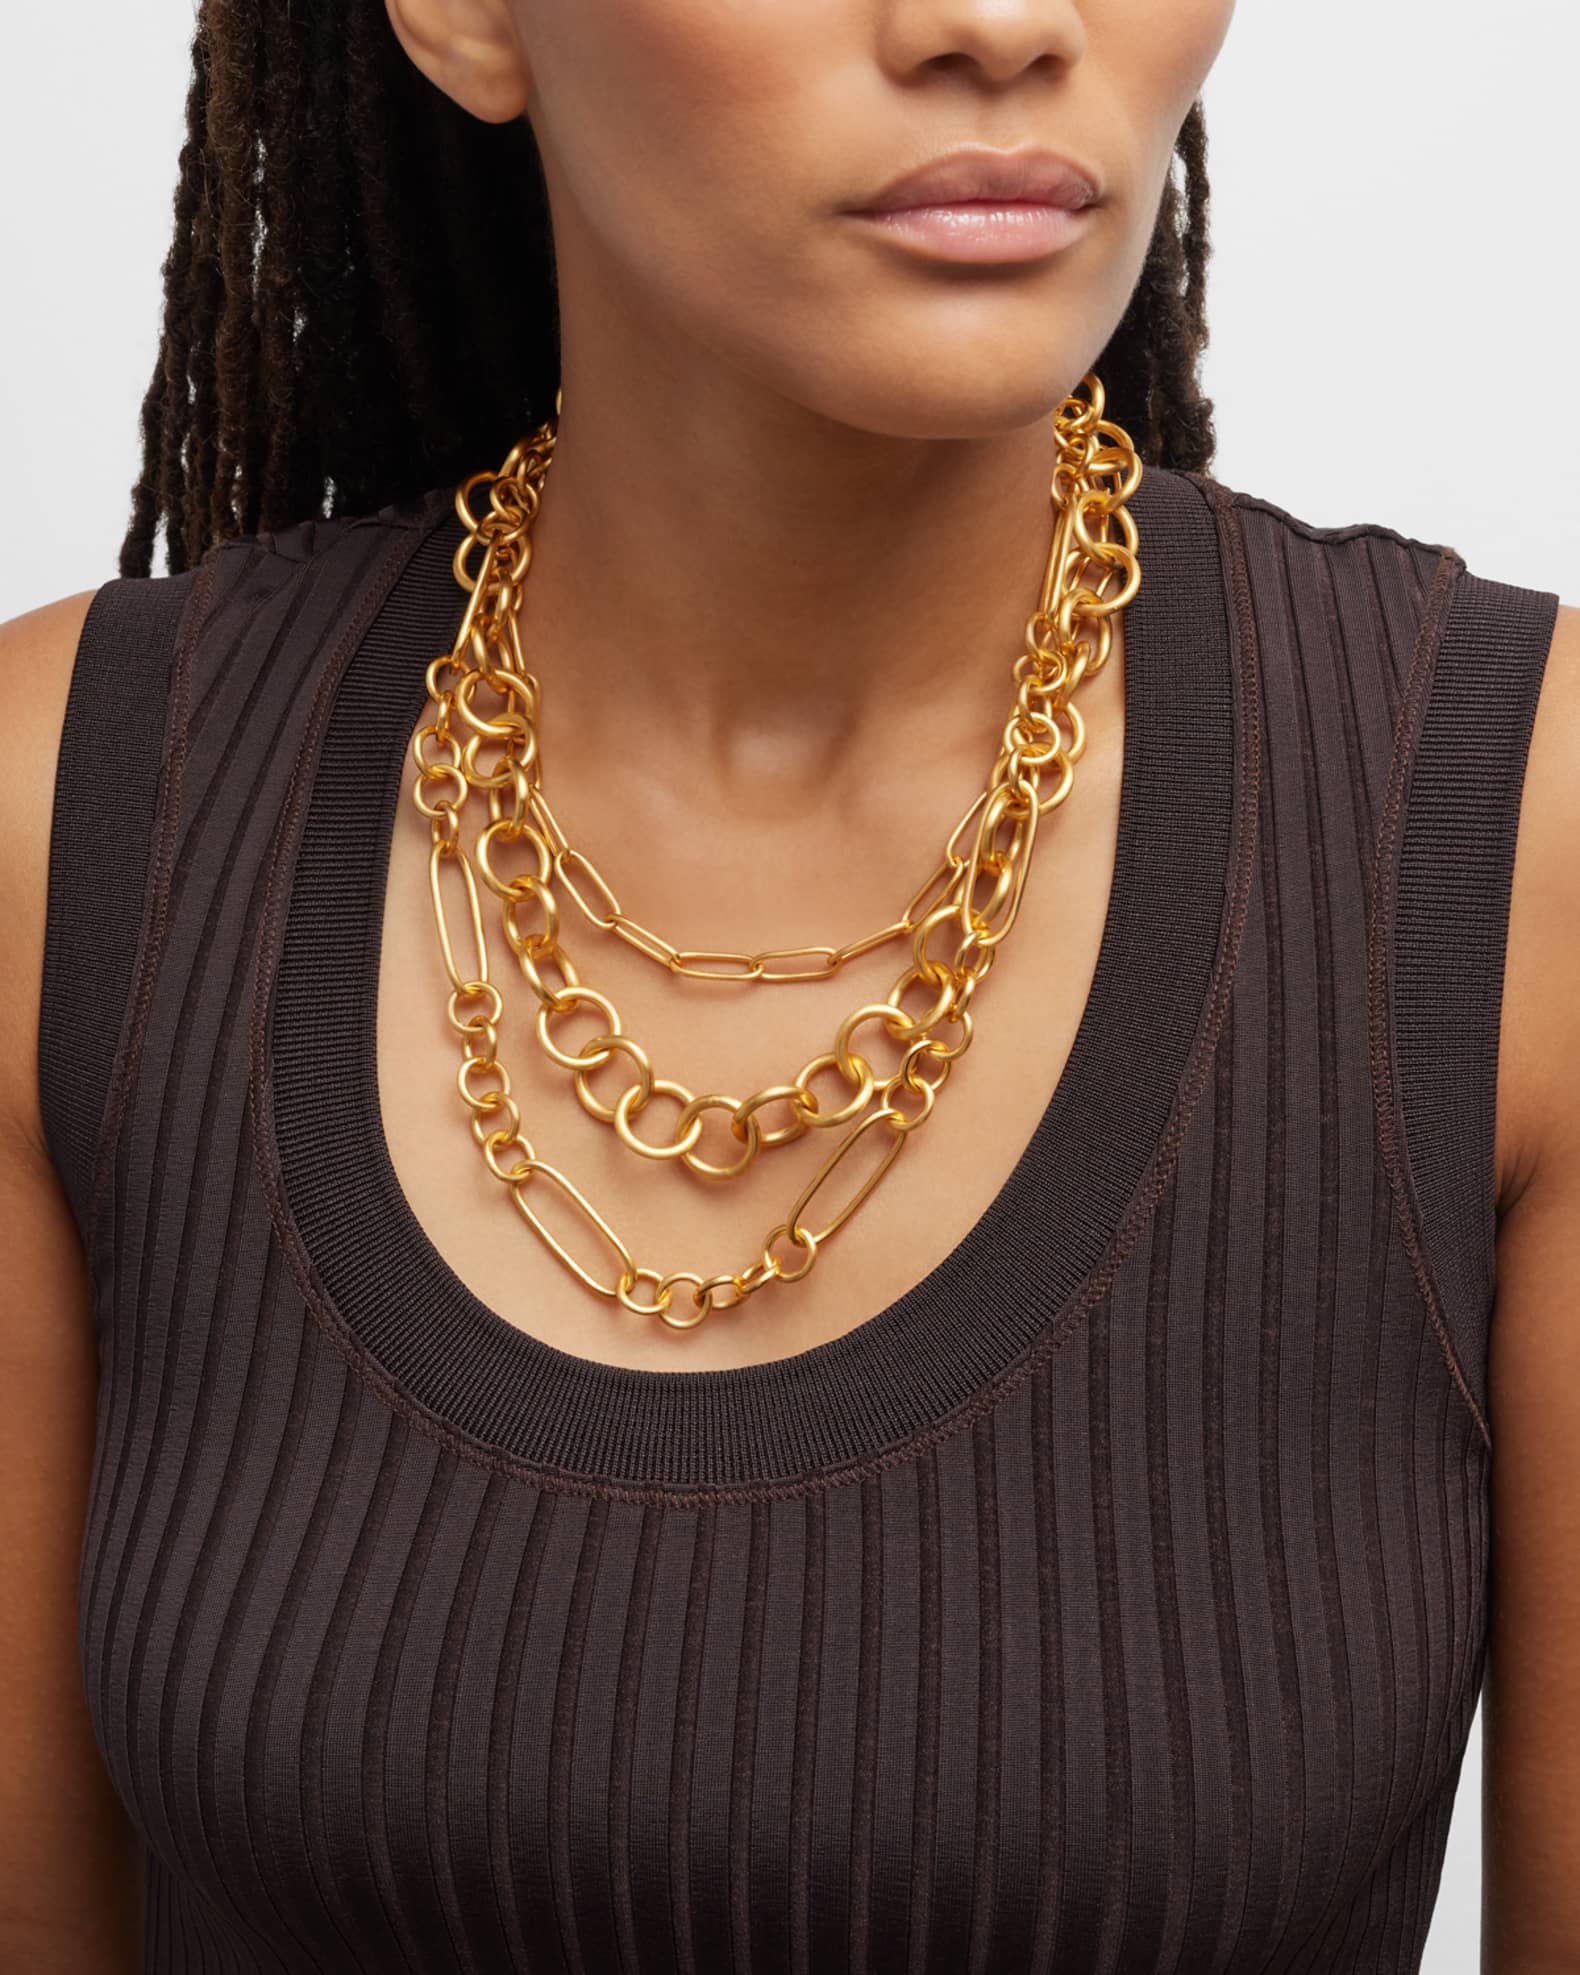 NEST Jewelry 24K Gold-Plated Multi-Layer Chain Necklace